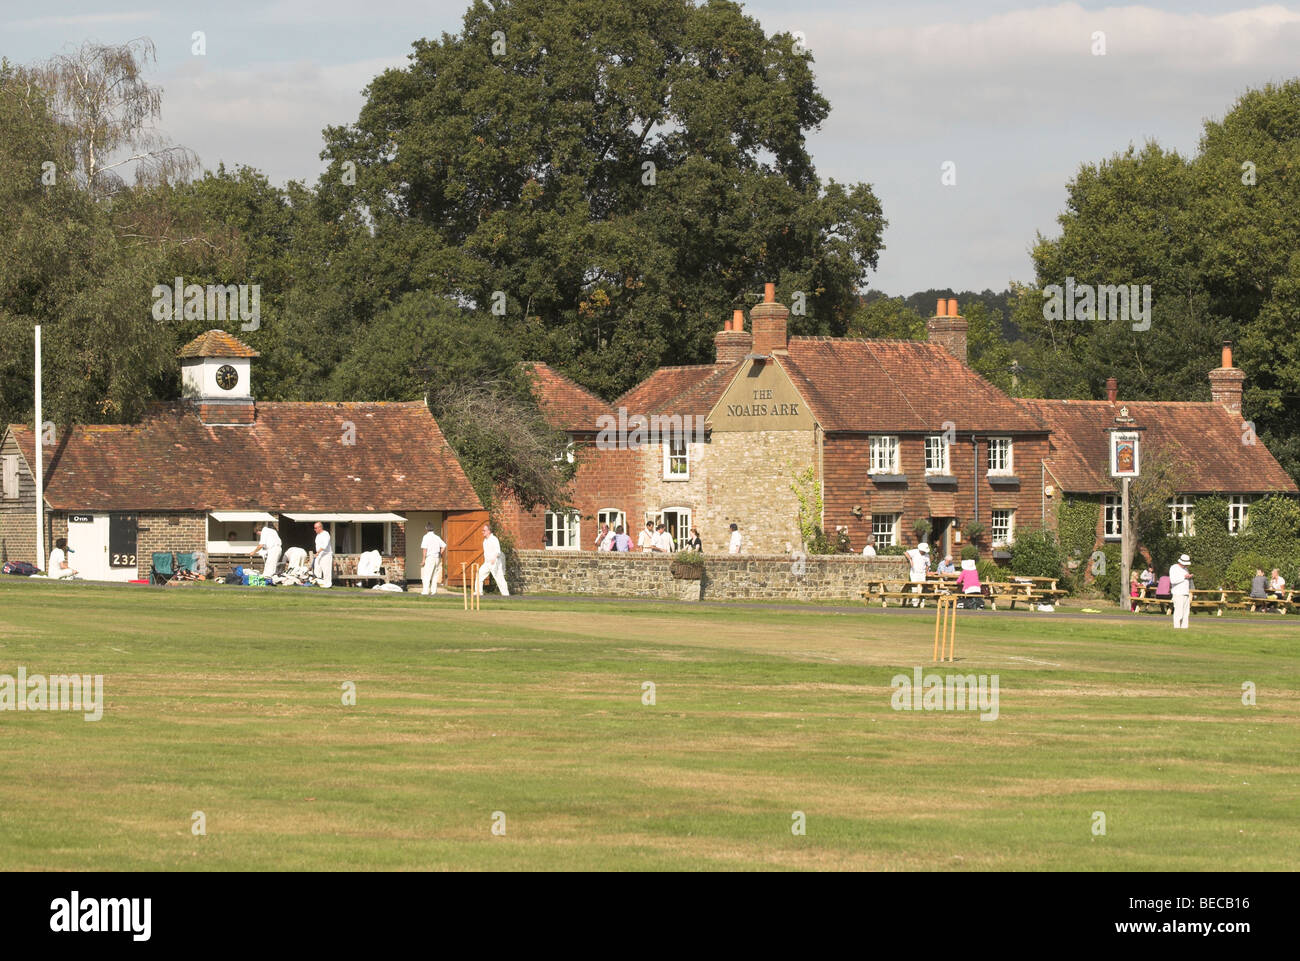 Lurgashall village green sees players readying for a game of cricket on a warm sunny autumn day. Stock Photo